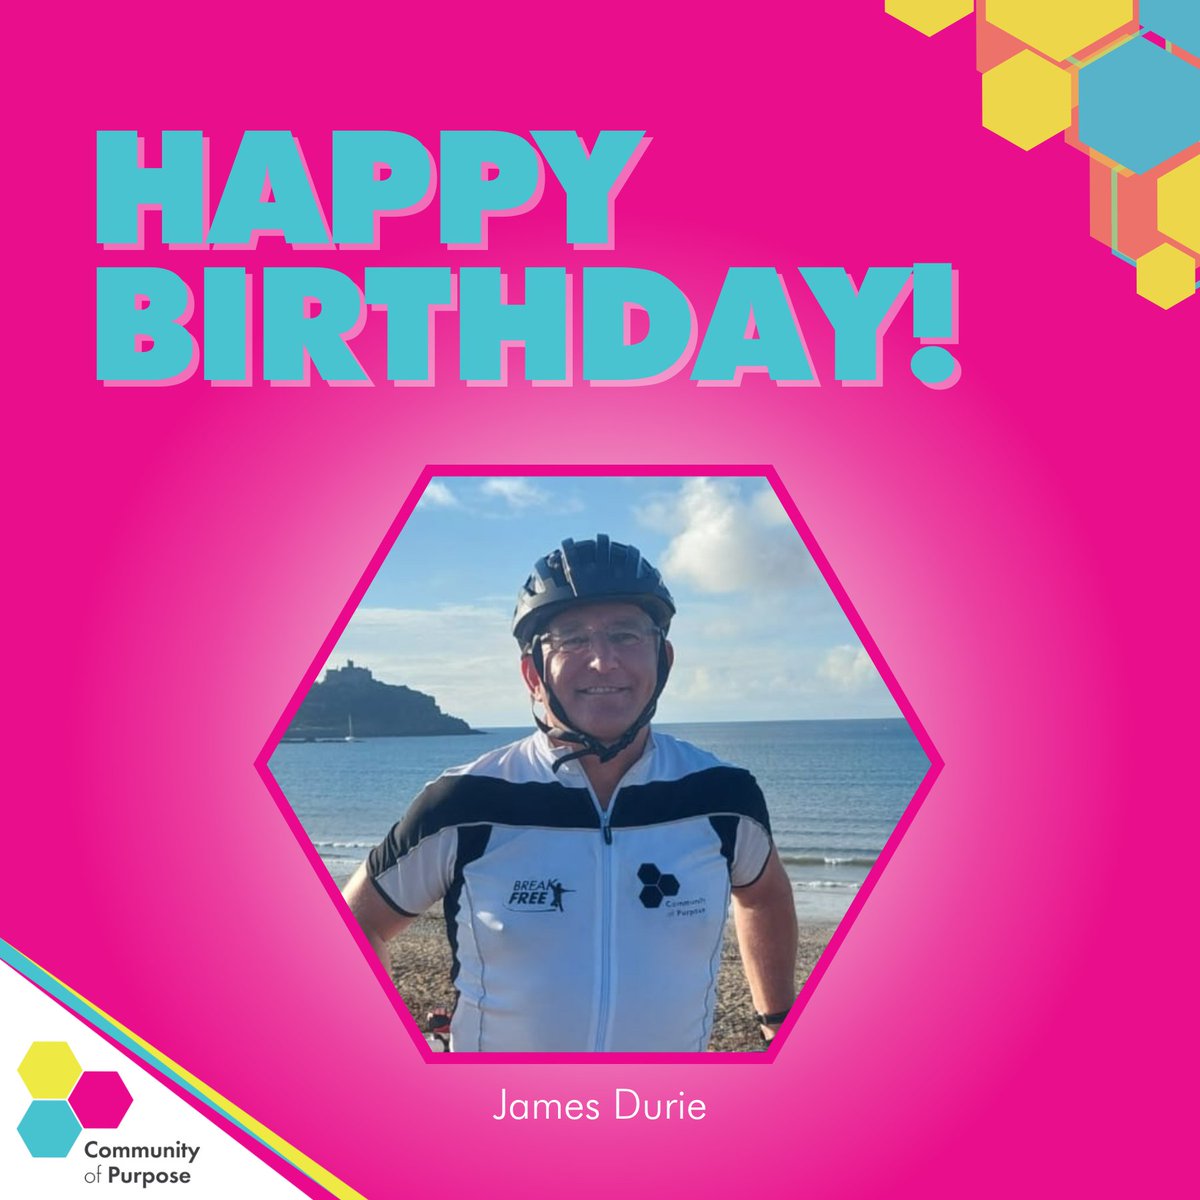 Wishing James Durie a very Happy Birthday!🎂 All of the team at Community of Purpose hope you have a fantastic day!🥳 #empoweringpeople #Birthday #celebrations